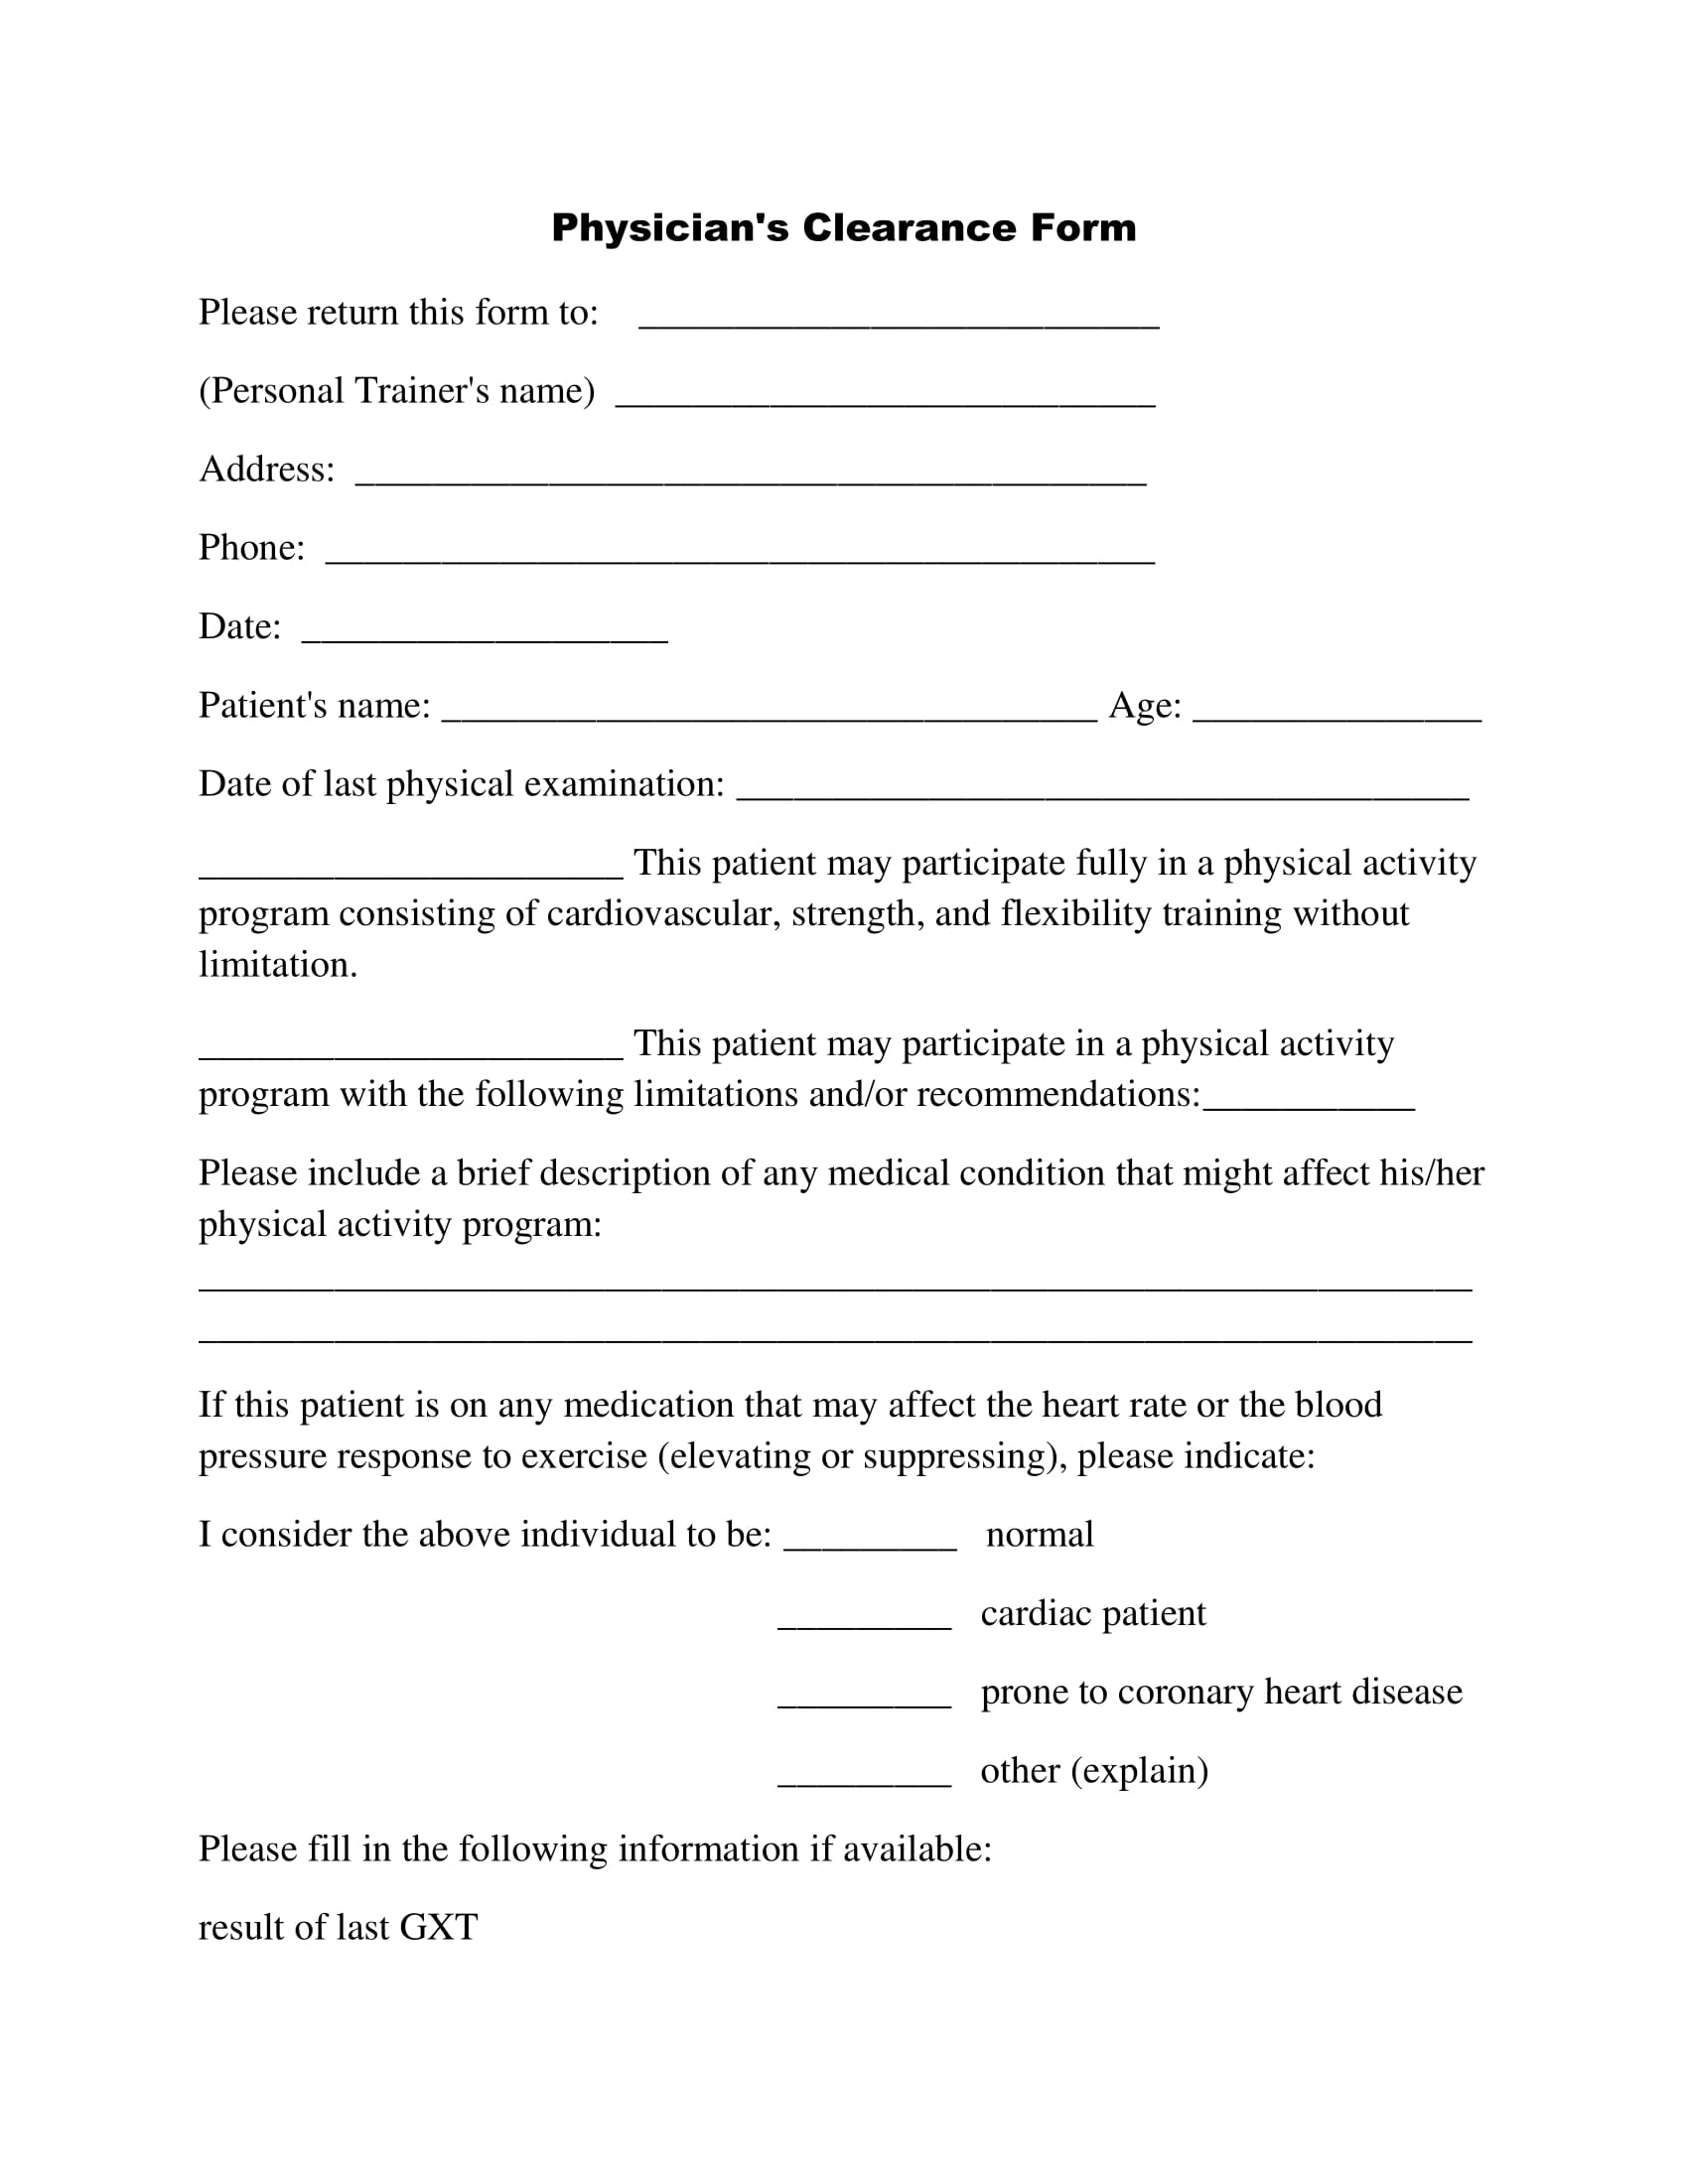 Physician clearance for for personal trainers you can download, edit and print.